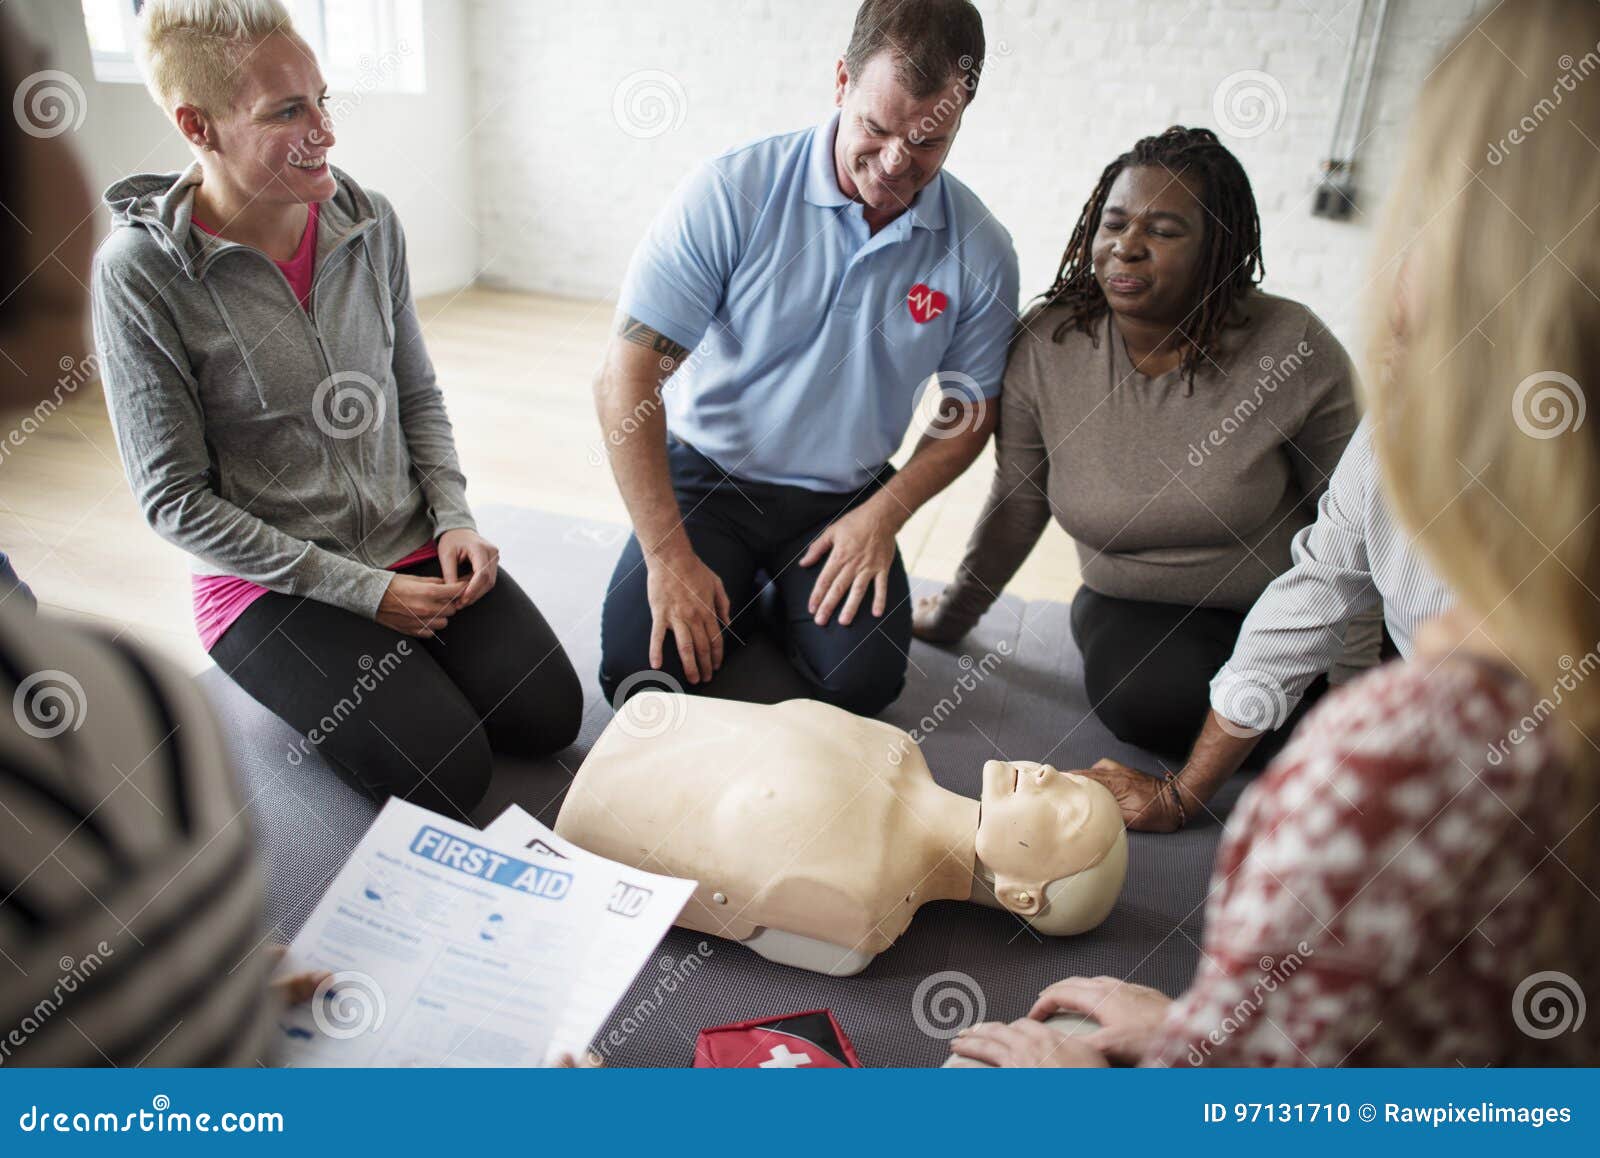 cpr first aid training concept